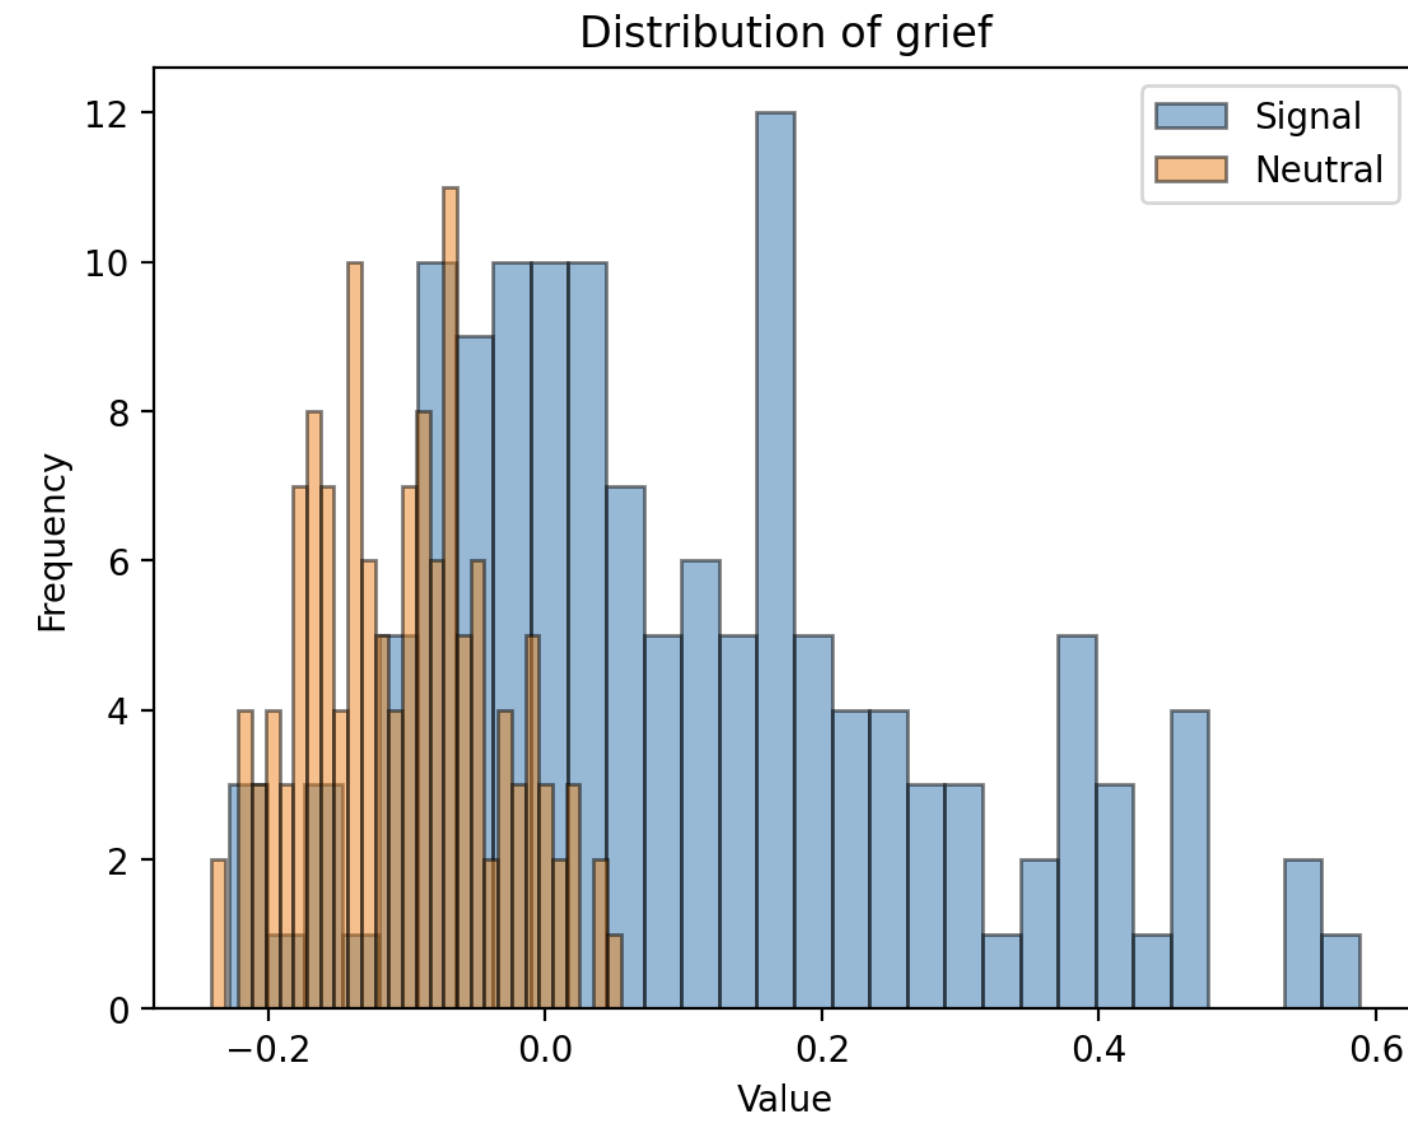 histogram, neutral vs grief. Neutral is clustered on the left, grief is spread across the entire scope